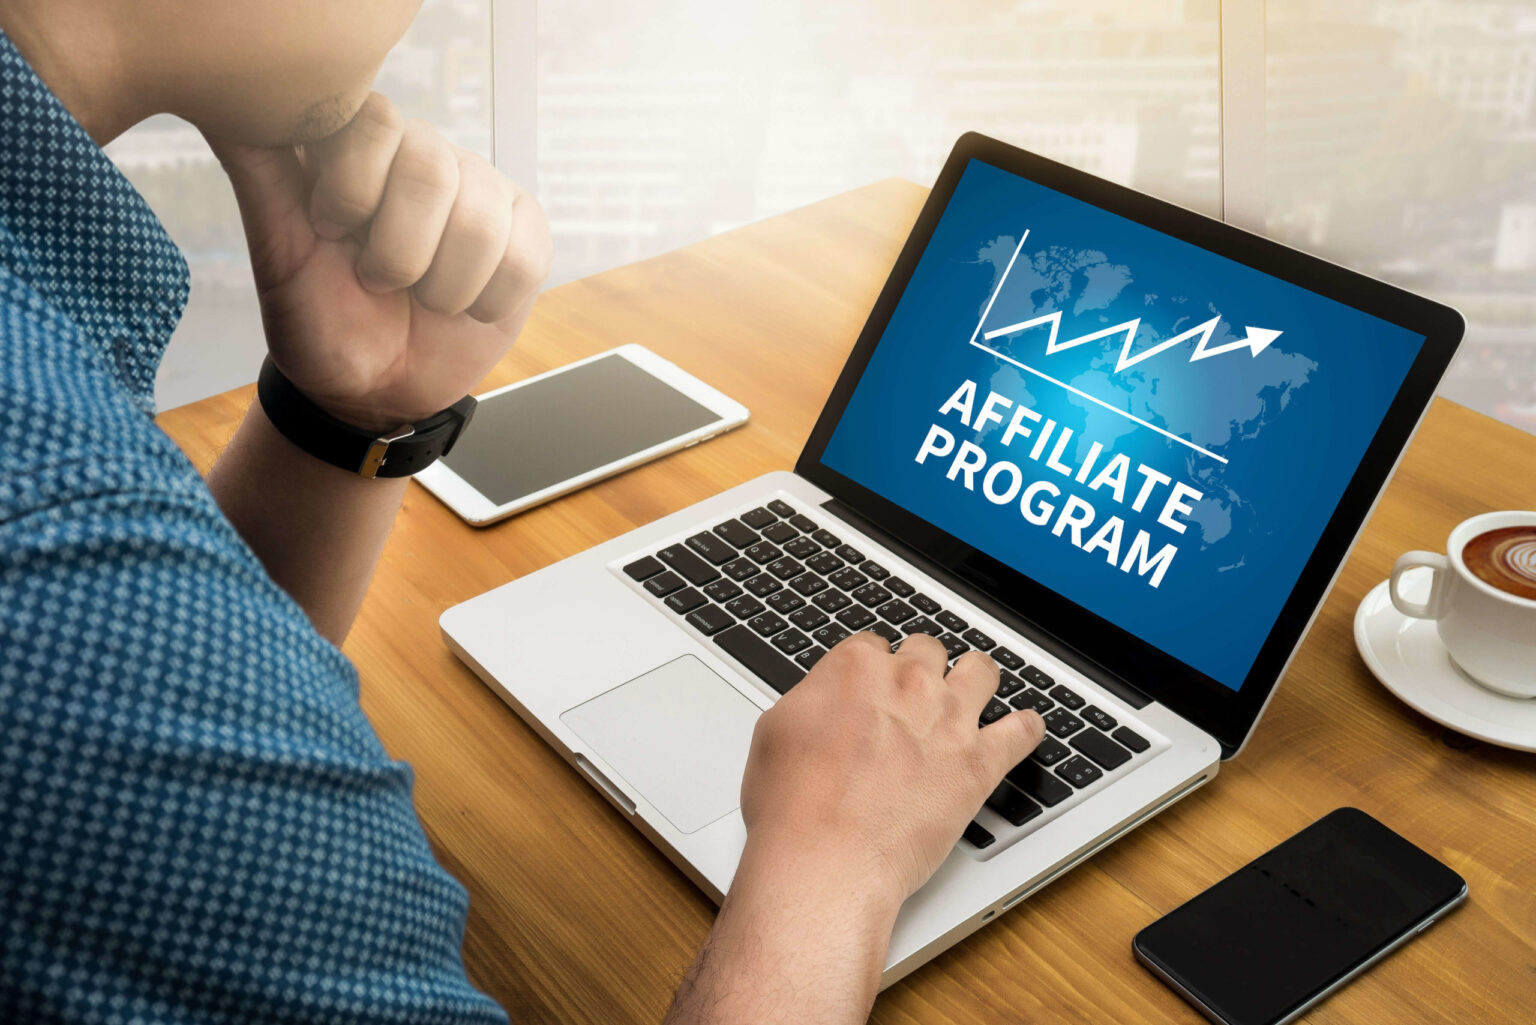 Looking for the perfect affiliate program for your website or blog? Learn how to evaluate and compare programs so you can find one that’s right for you.